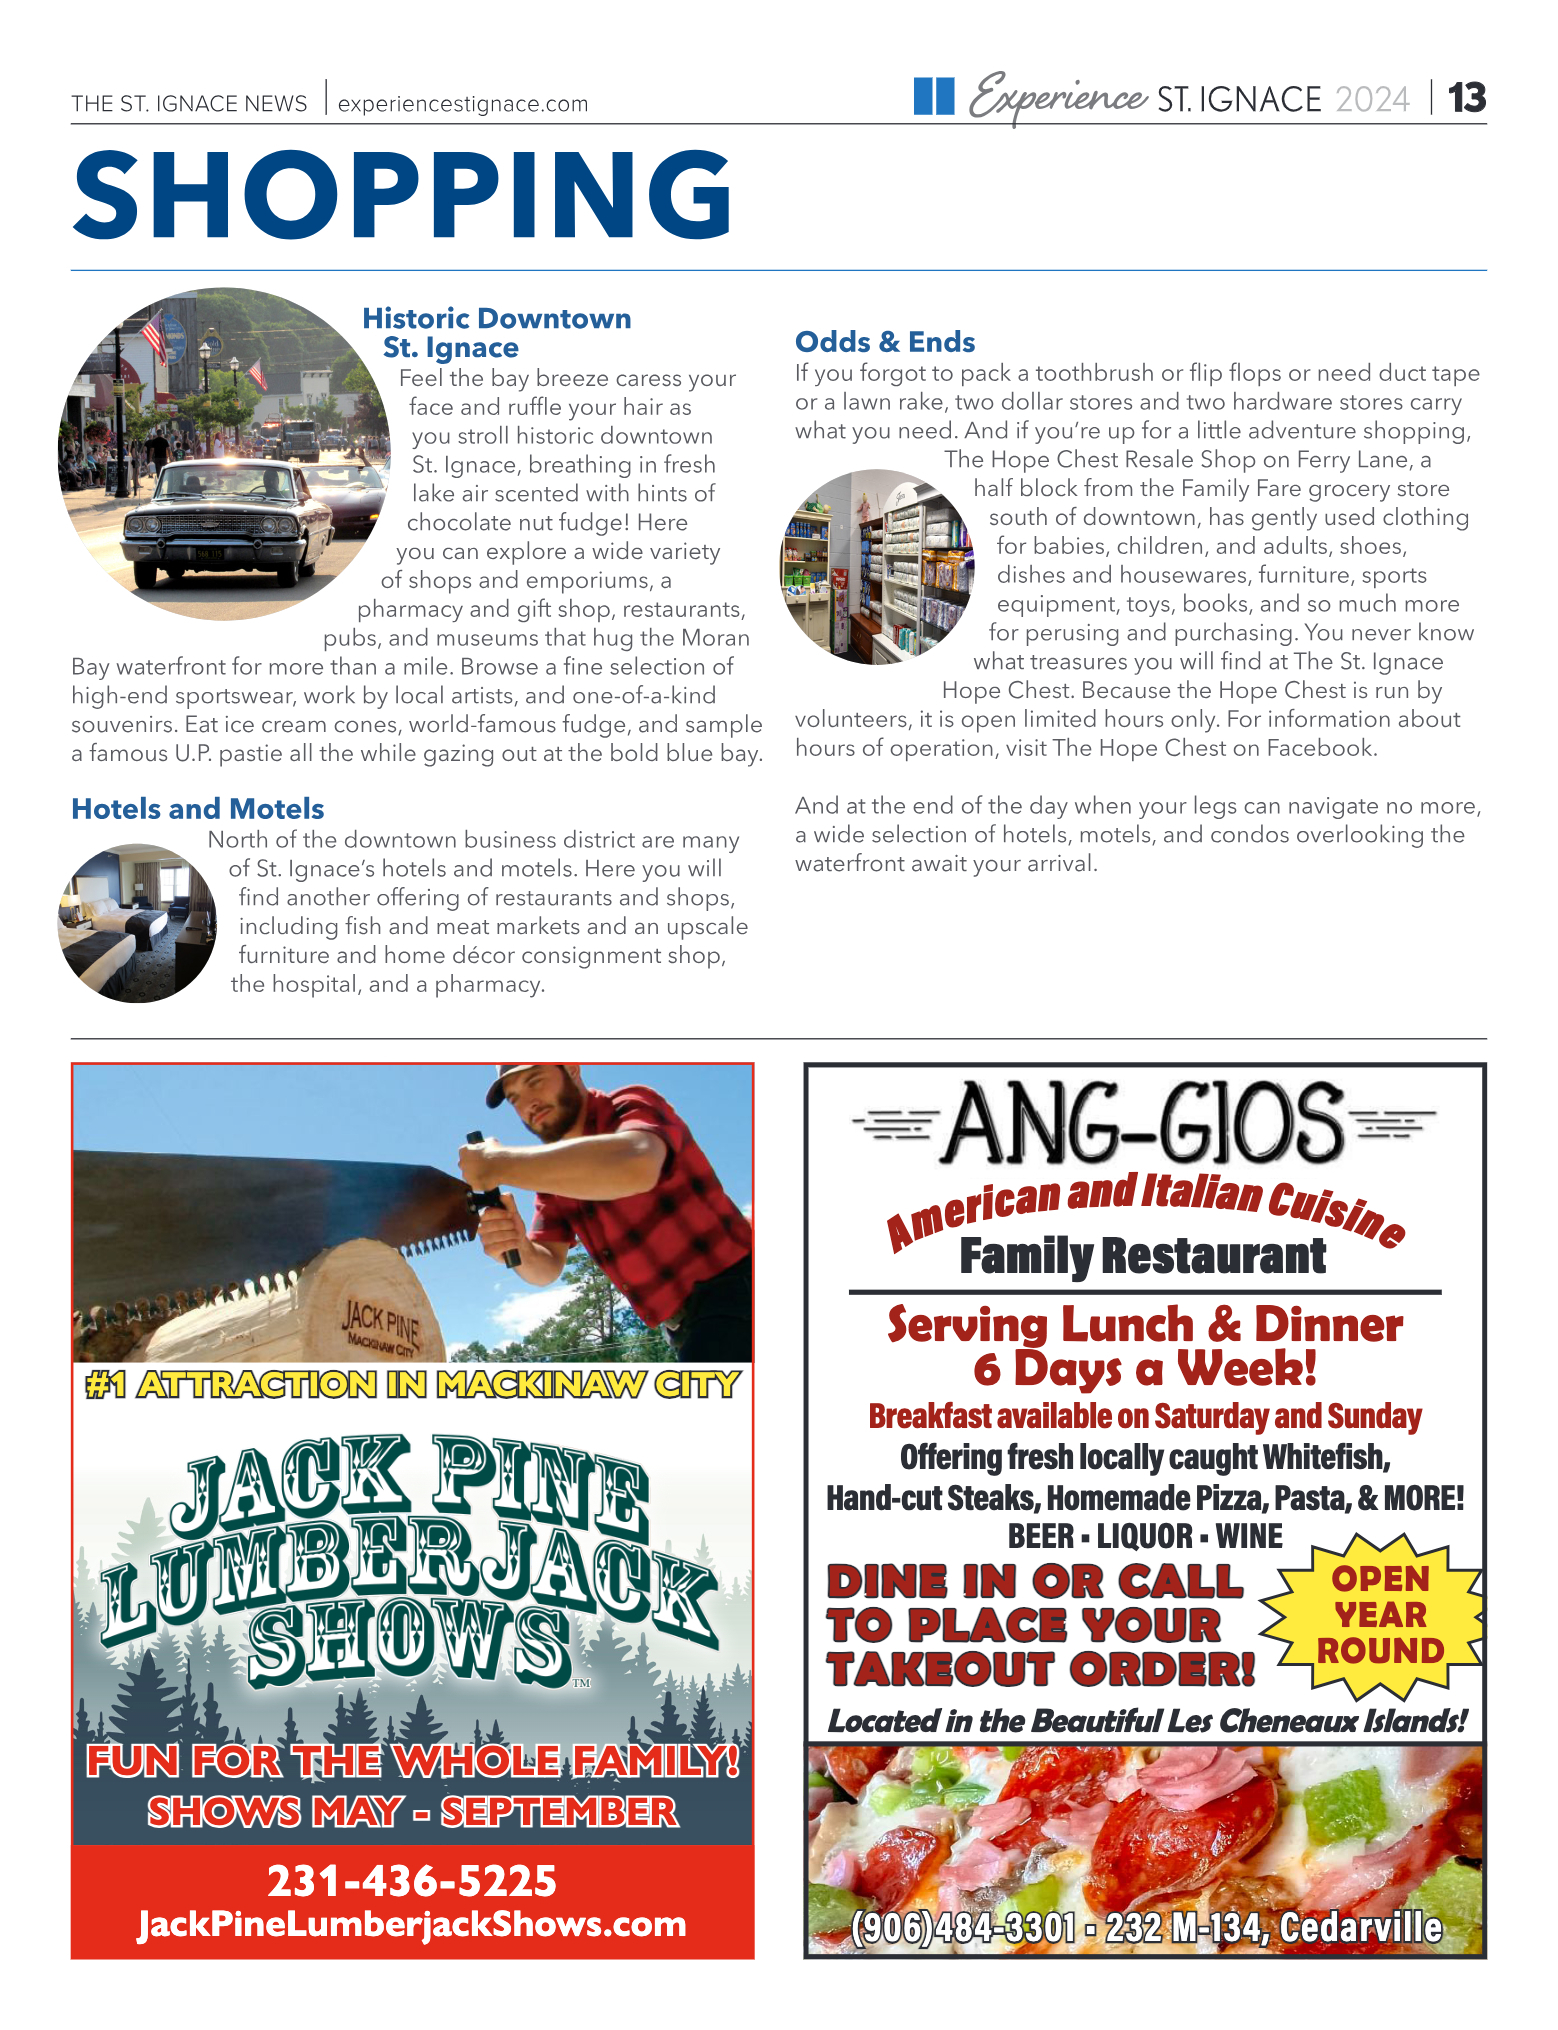 Experience St. Ignace - Guest Travel Guide 2024 - page 13